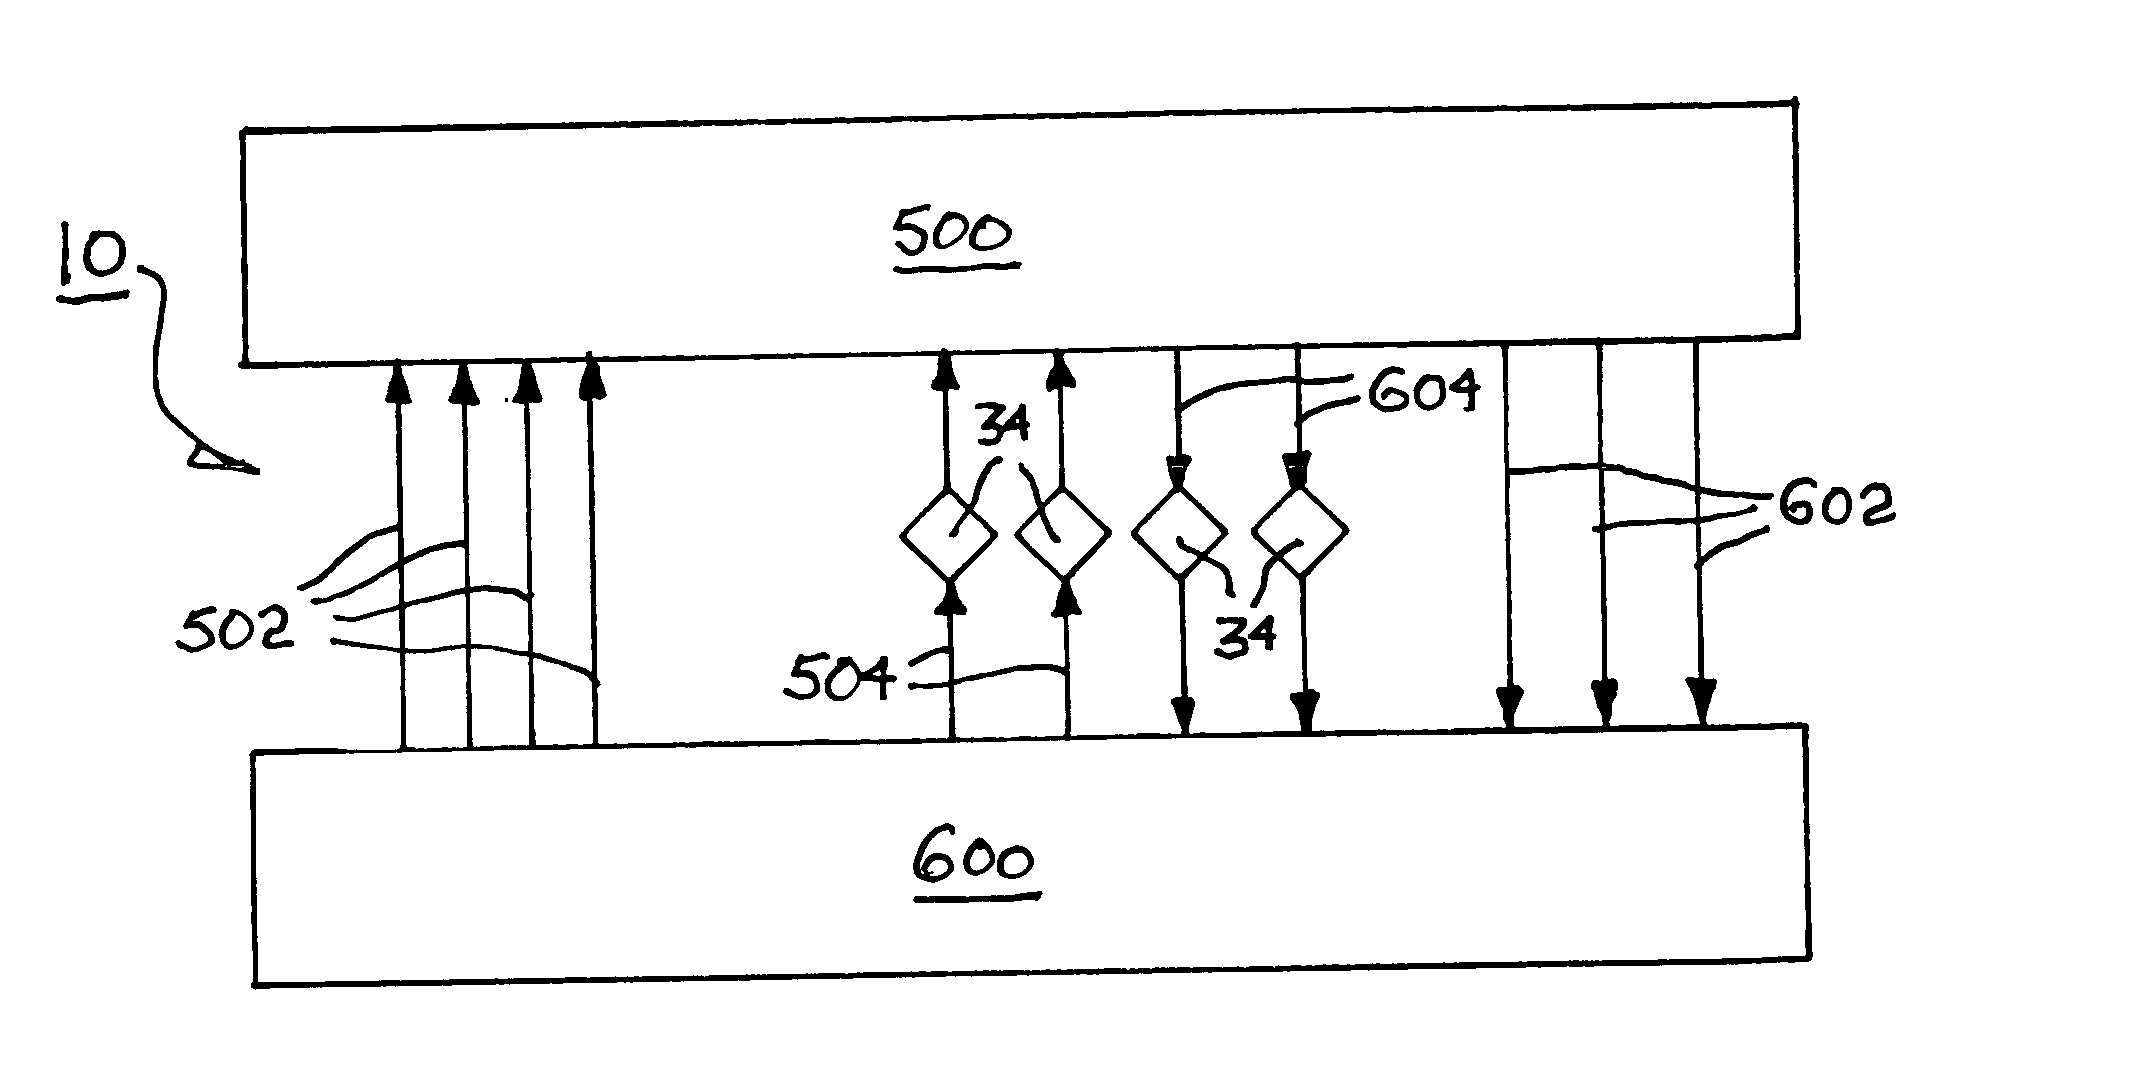 Method and apparatus for optimizing a steam boiler system